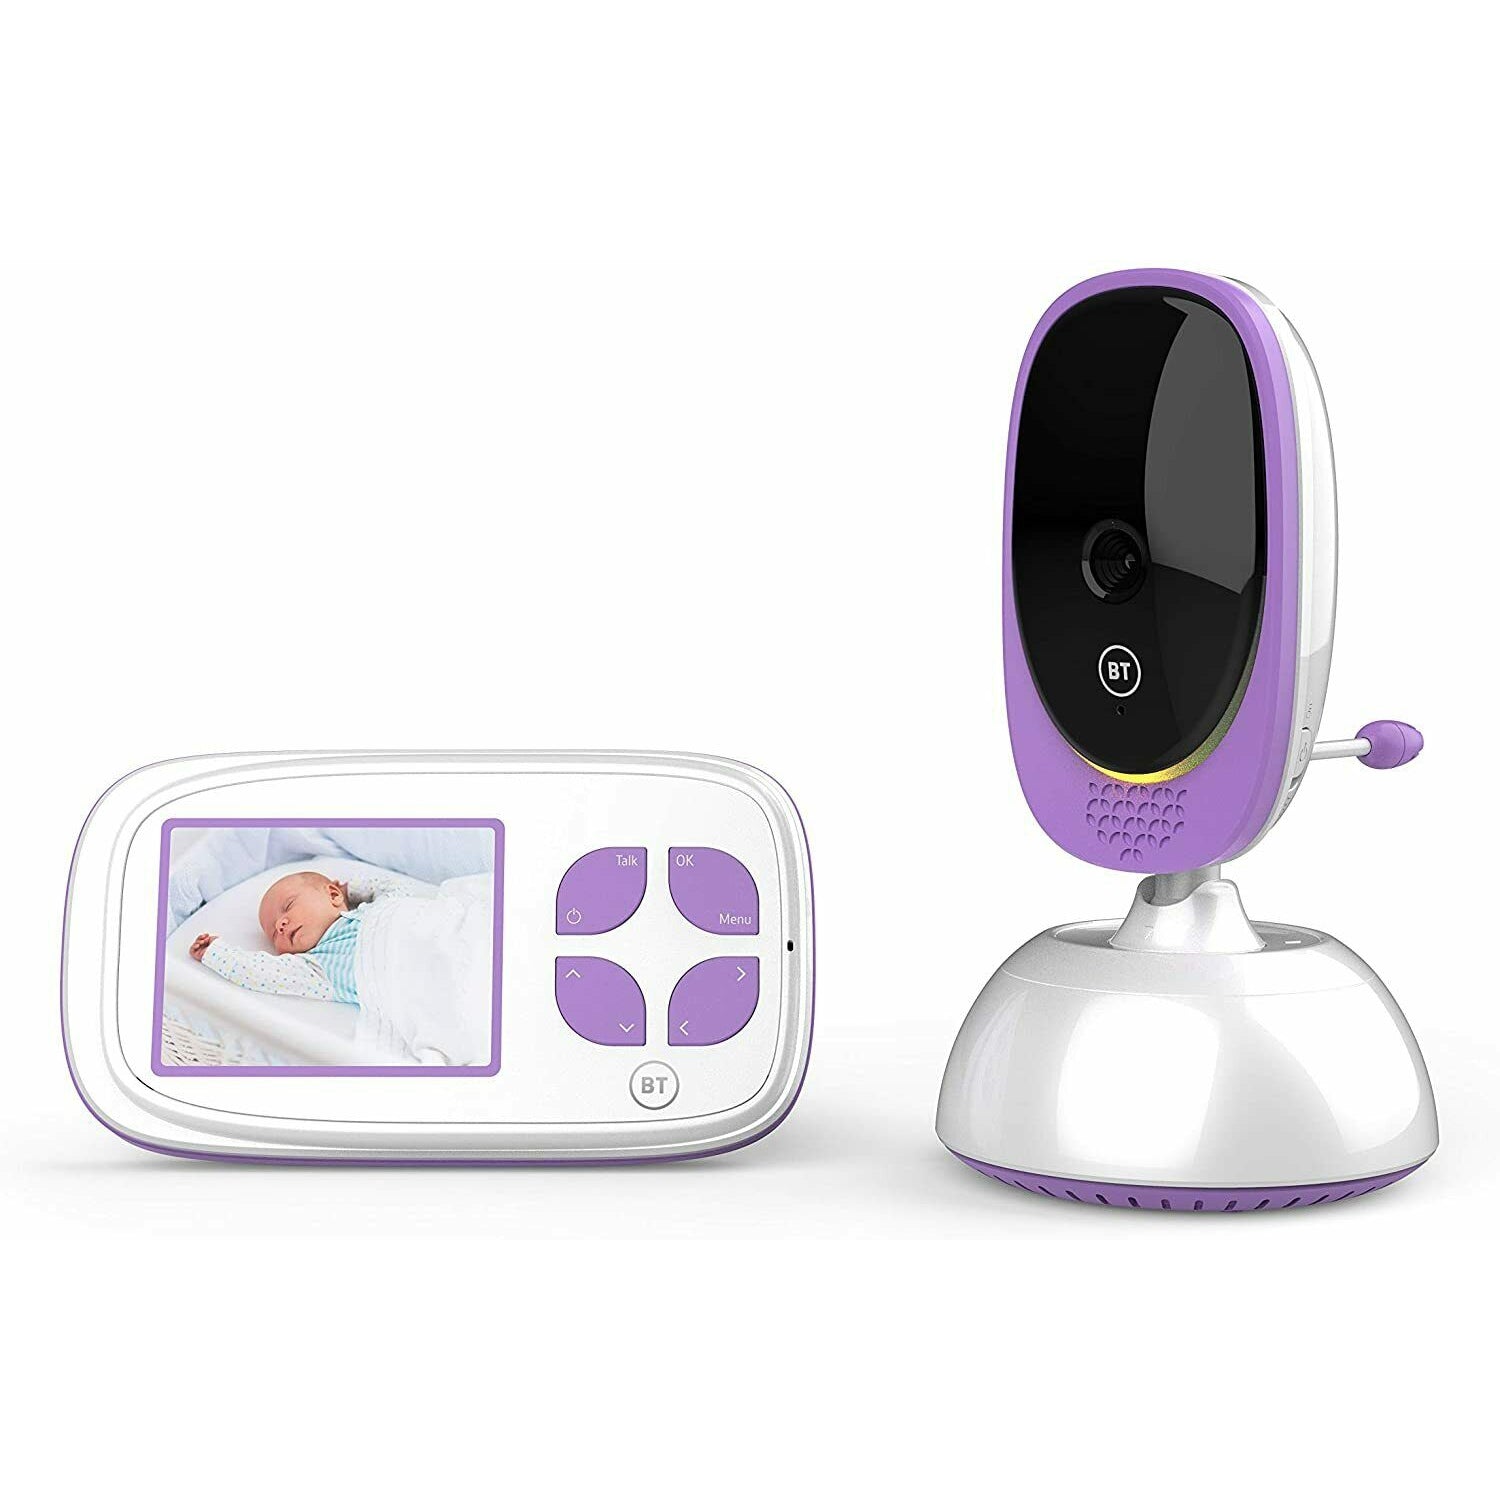 BT Smart Video Baby Monitor with 2.8" Screen 096031